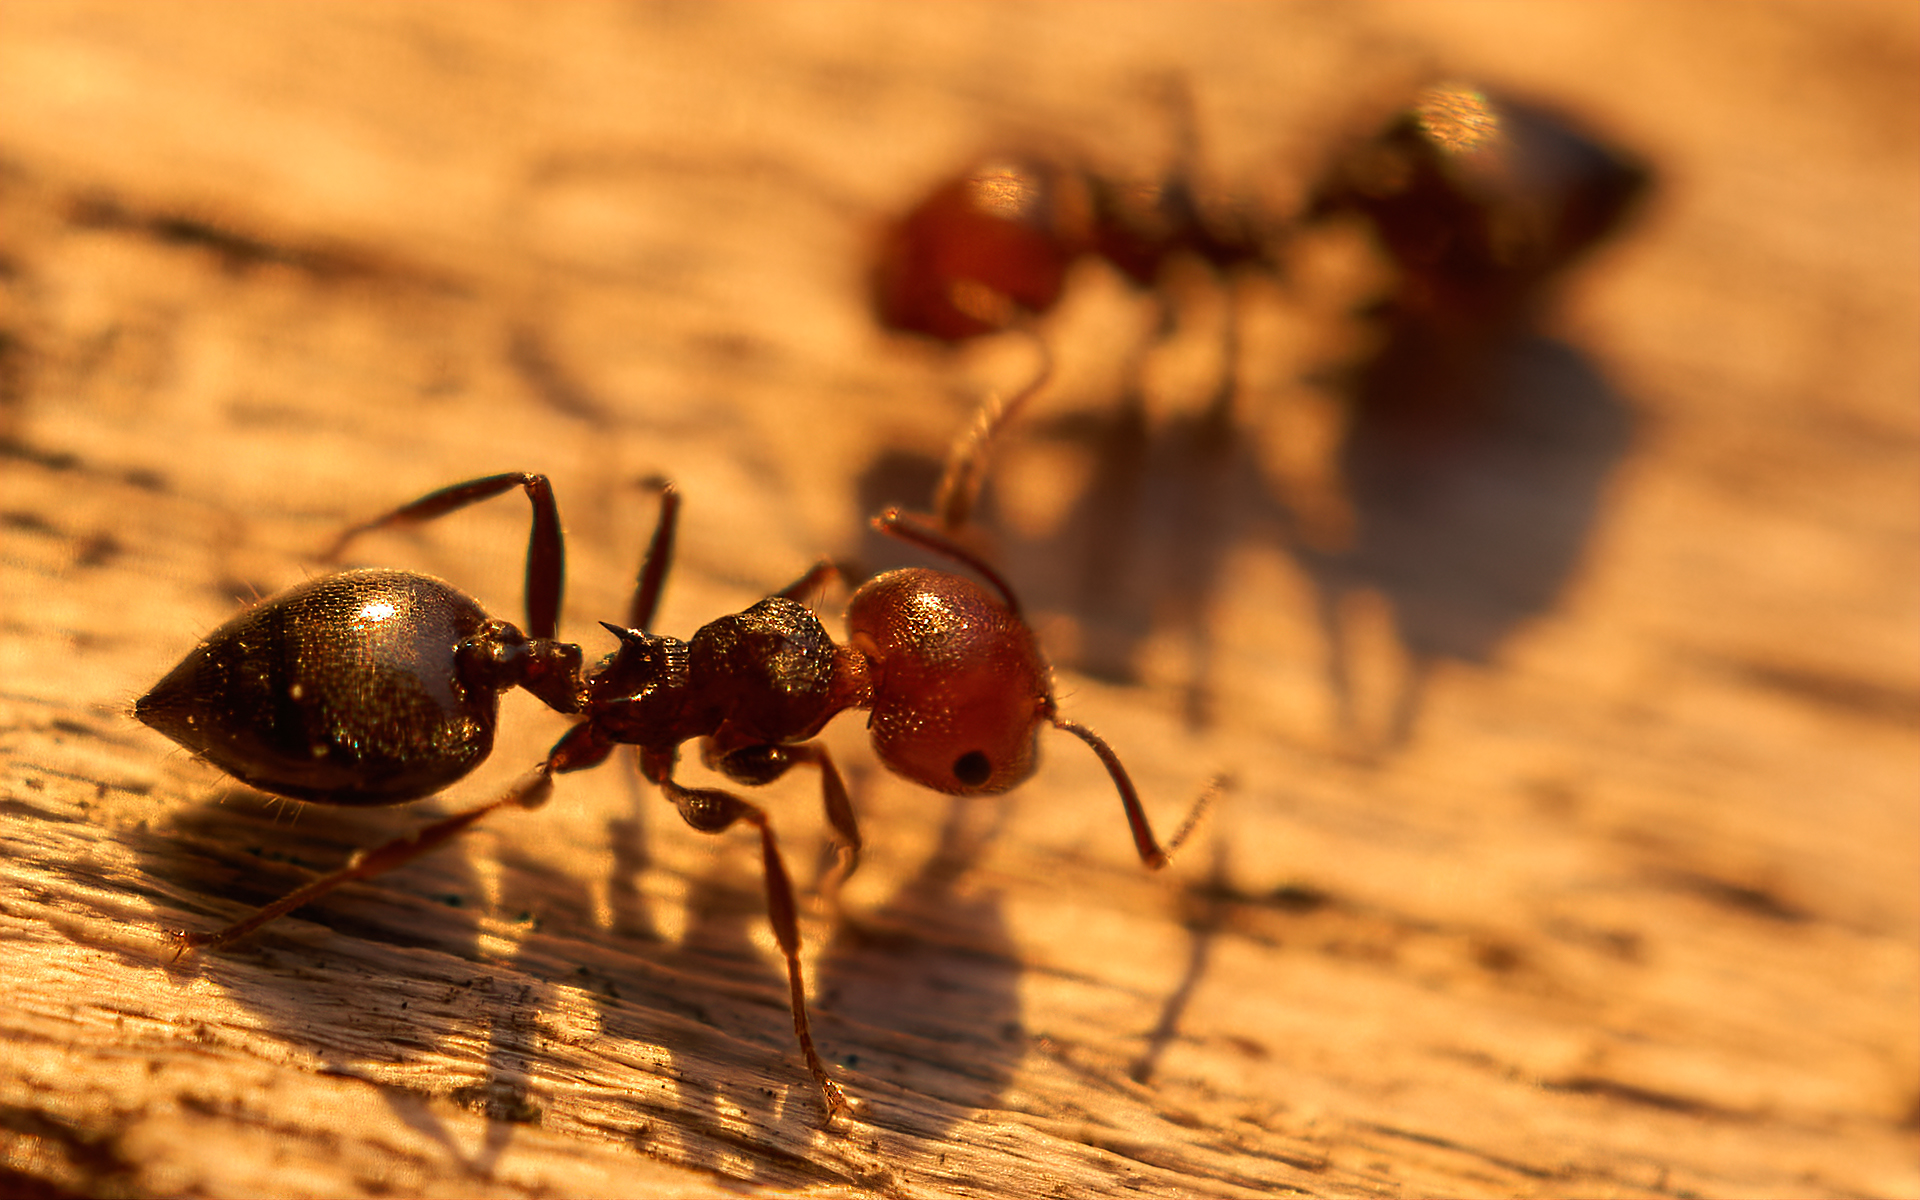 The Plant Ant (Crematogaster)...